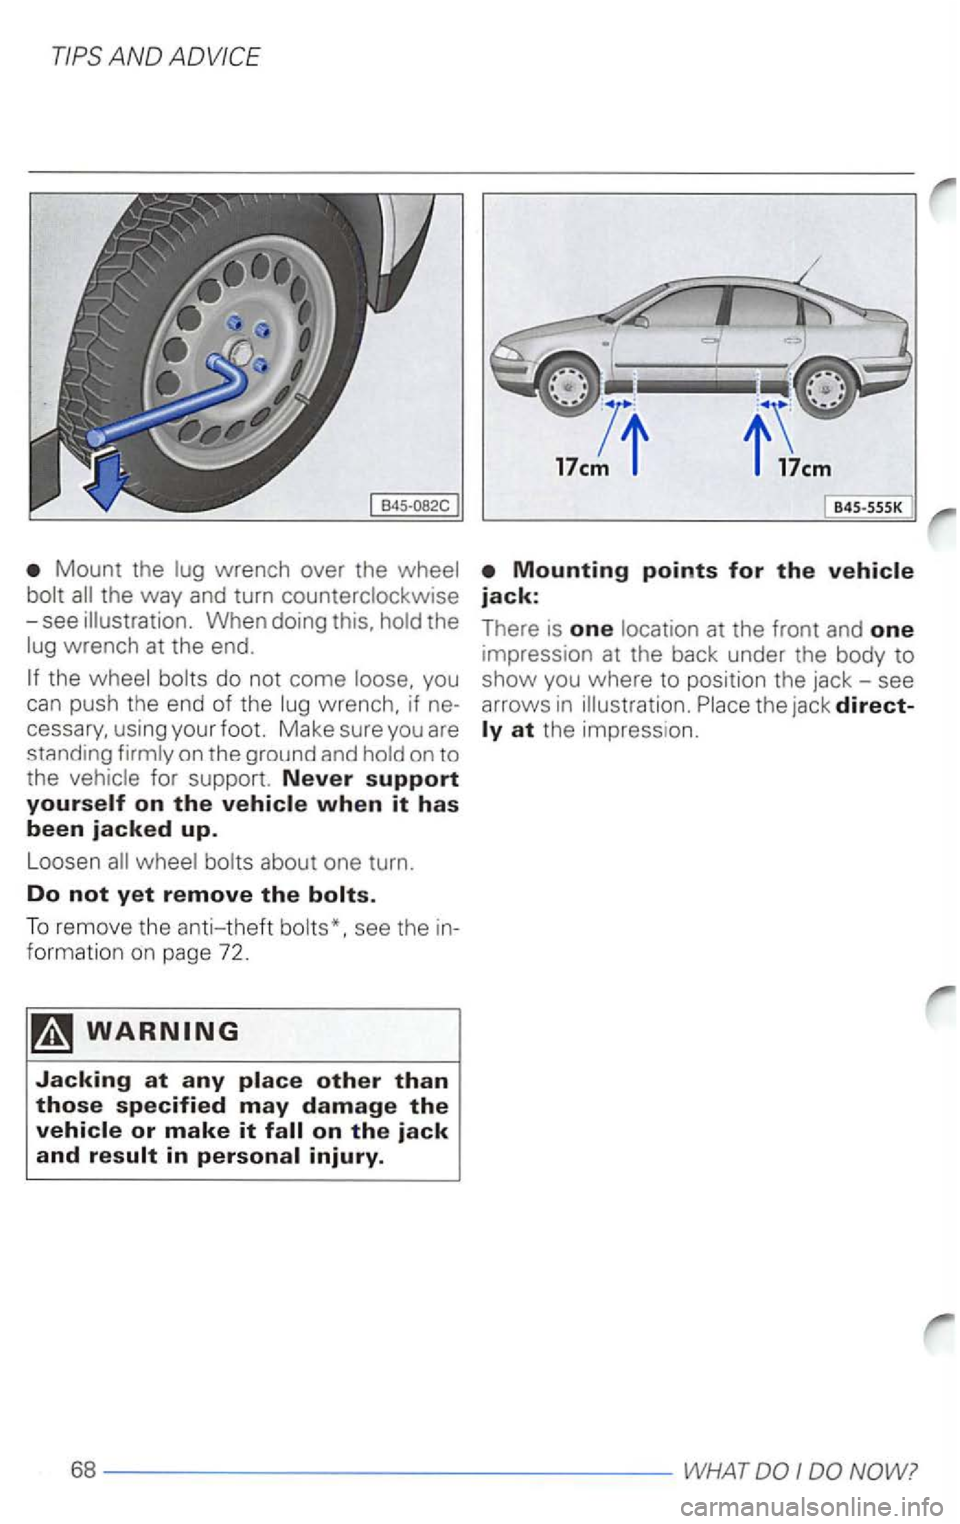 VOLKSWAGEN PASSAT 1998  Owners Manual Mount the lug wrench  over the wheel 
bolt 
whee l bolts  about  one turn. 
Do not yet remove the 
To  rem ove  the  an ti-theft bo lts*.  see th e  in ­
f ormatio n on  page  72. 
845 -SSSK 
Mountin